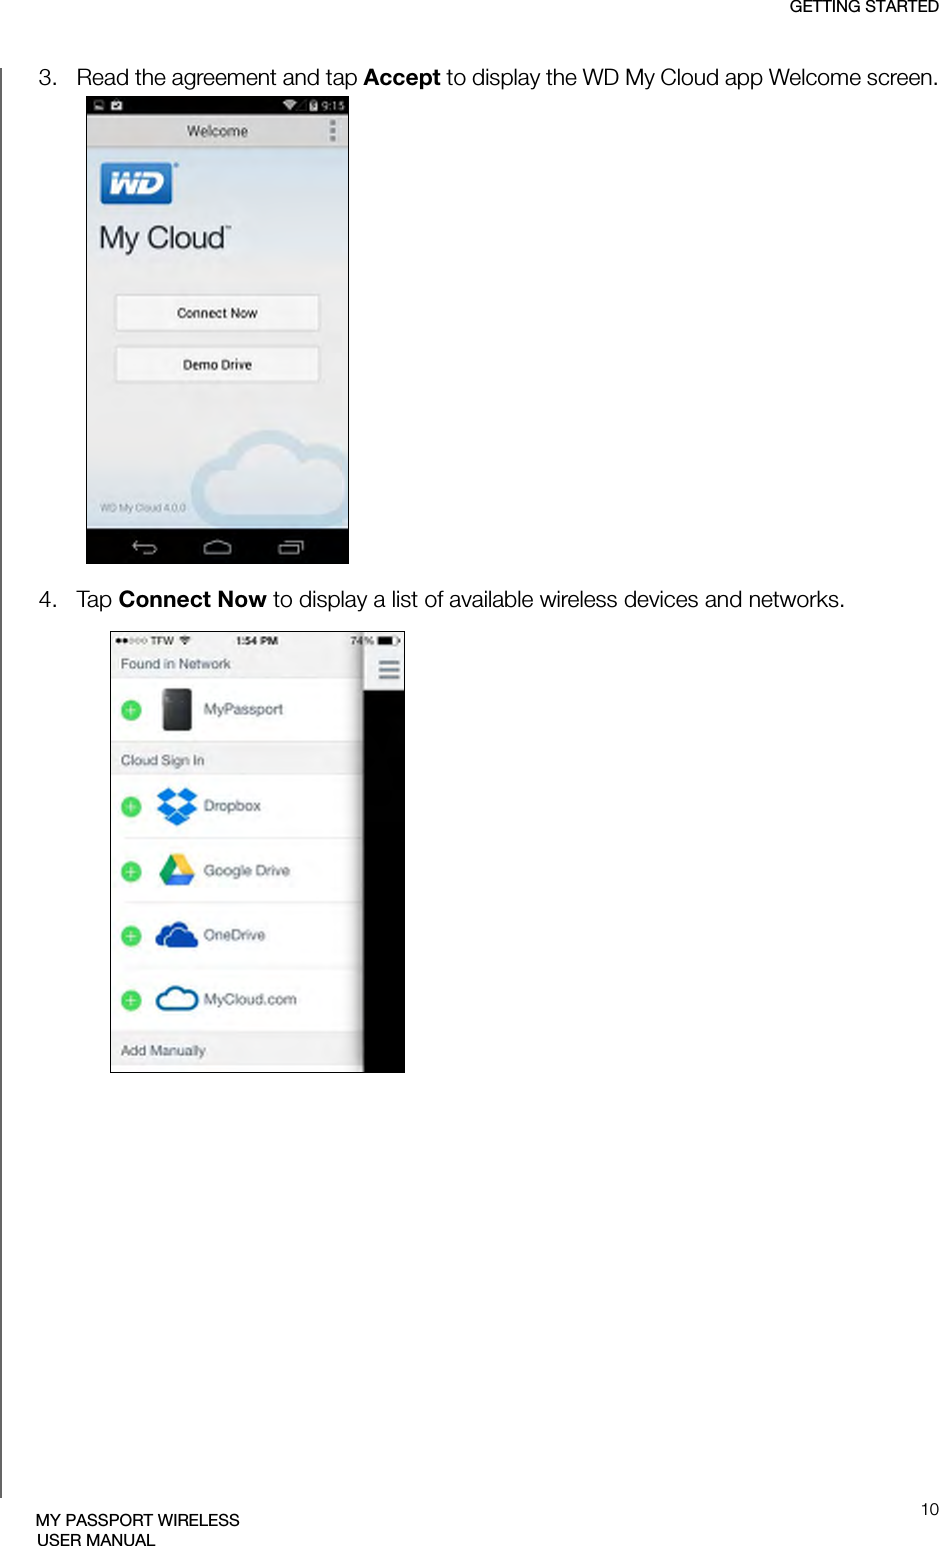 GETTING STARTED10MY PASSPORT WIRELESSUSER MANUAL3.   Read the agreement and tap Accept to display the WD My Cloud app Welcome screen.4.   Tap Connect Now to display a list of available wireless devices and networks.